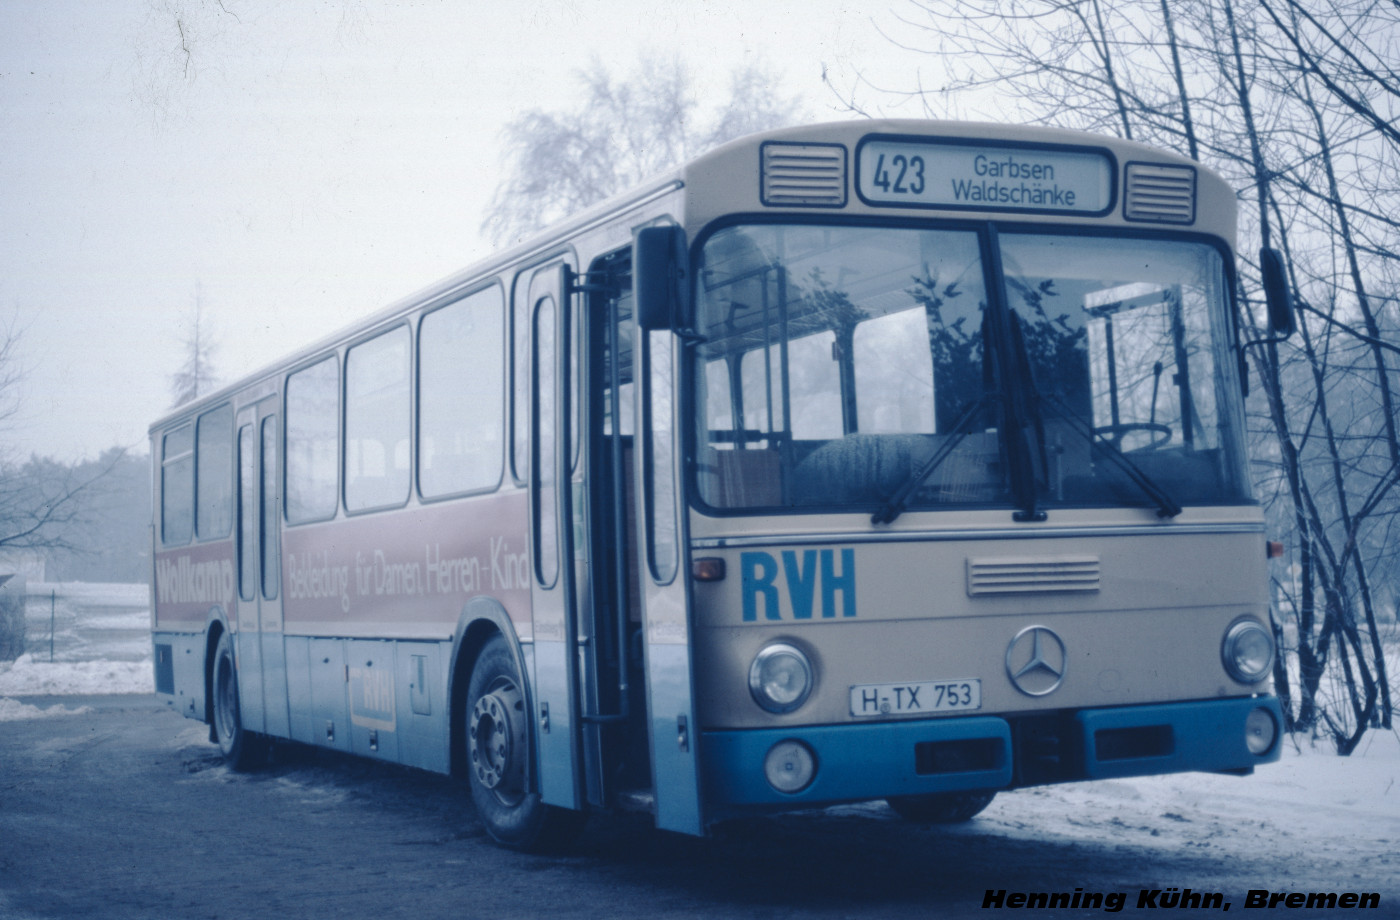 Transport Database and Photogallery - Mercedes-Benz O307 #H-TX 753